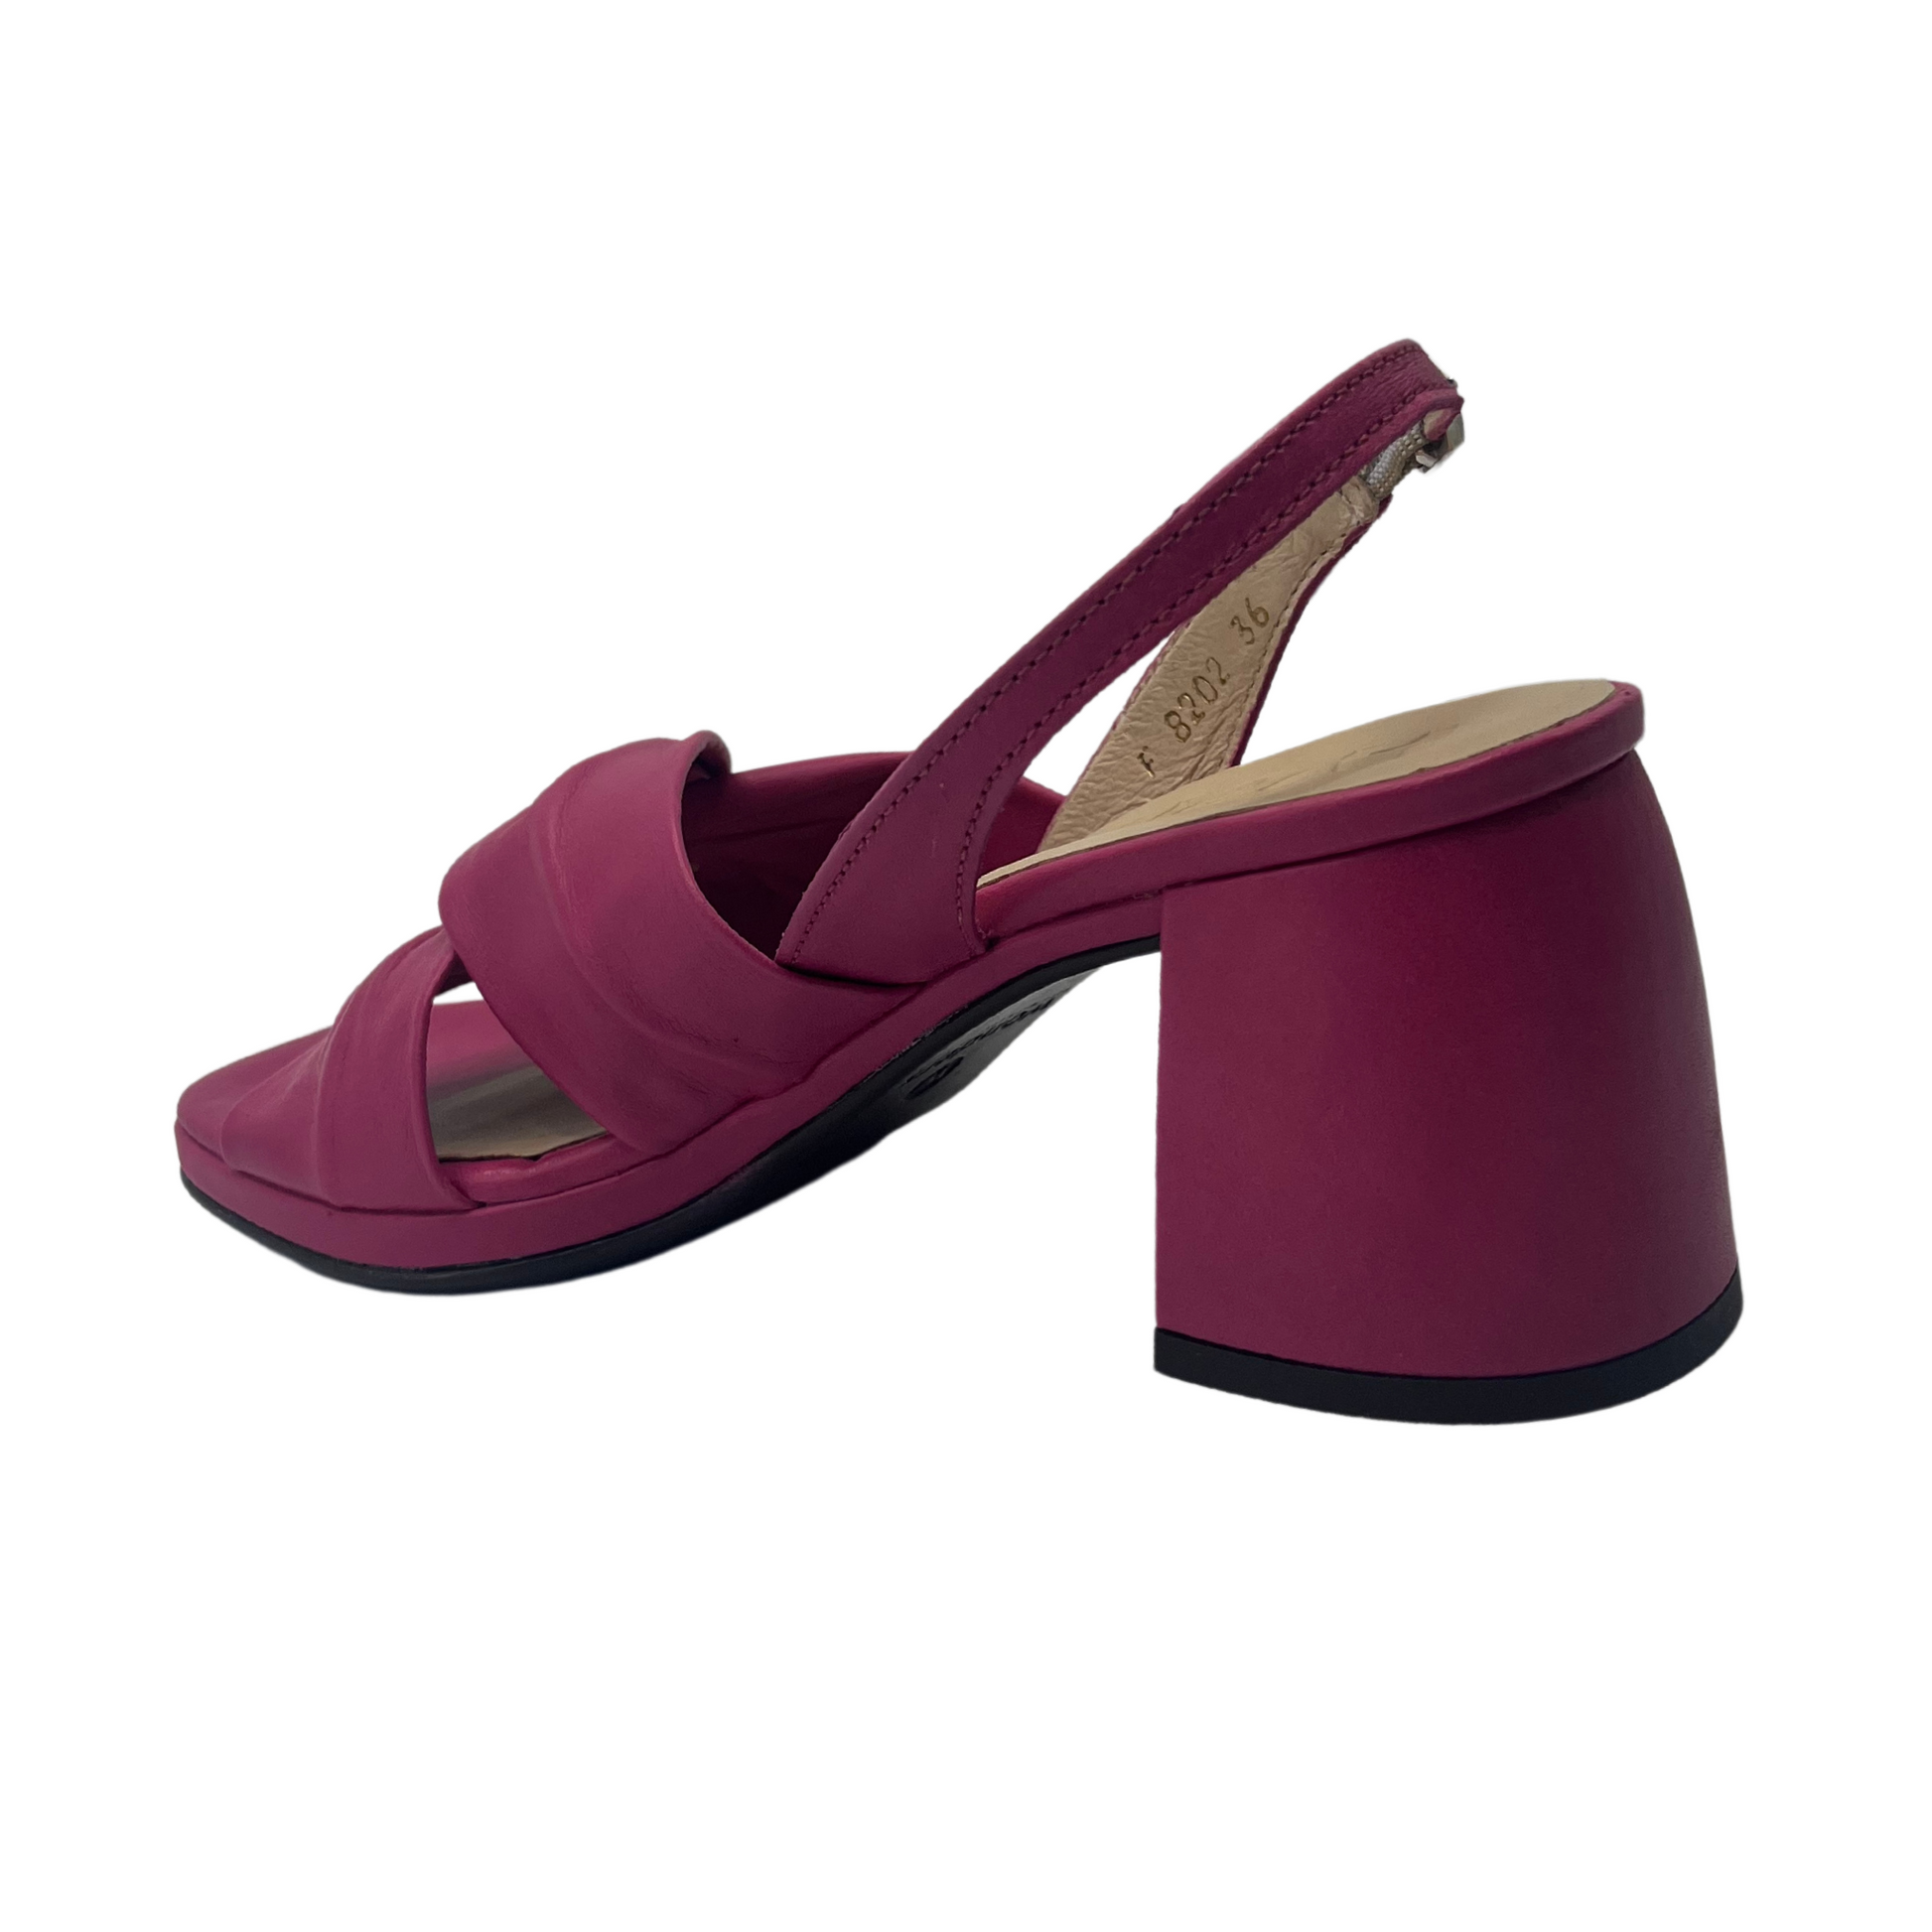 Back view of orchid sandal with chunky block heel and buckle strap